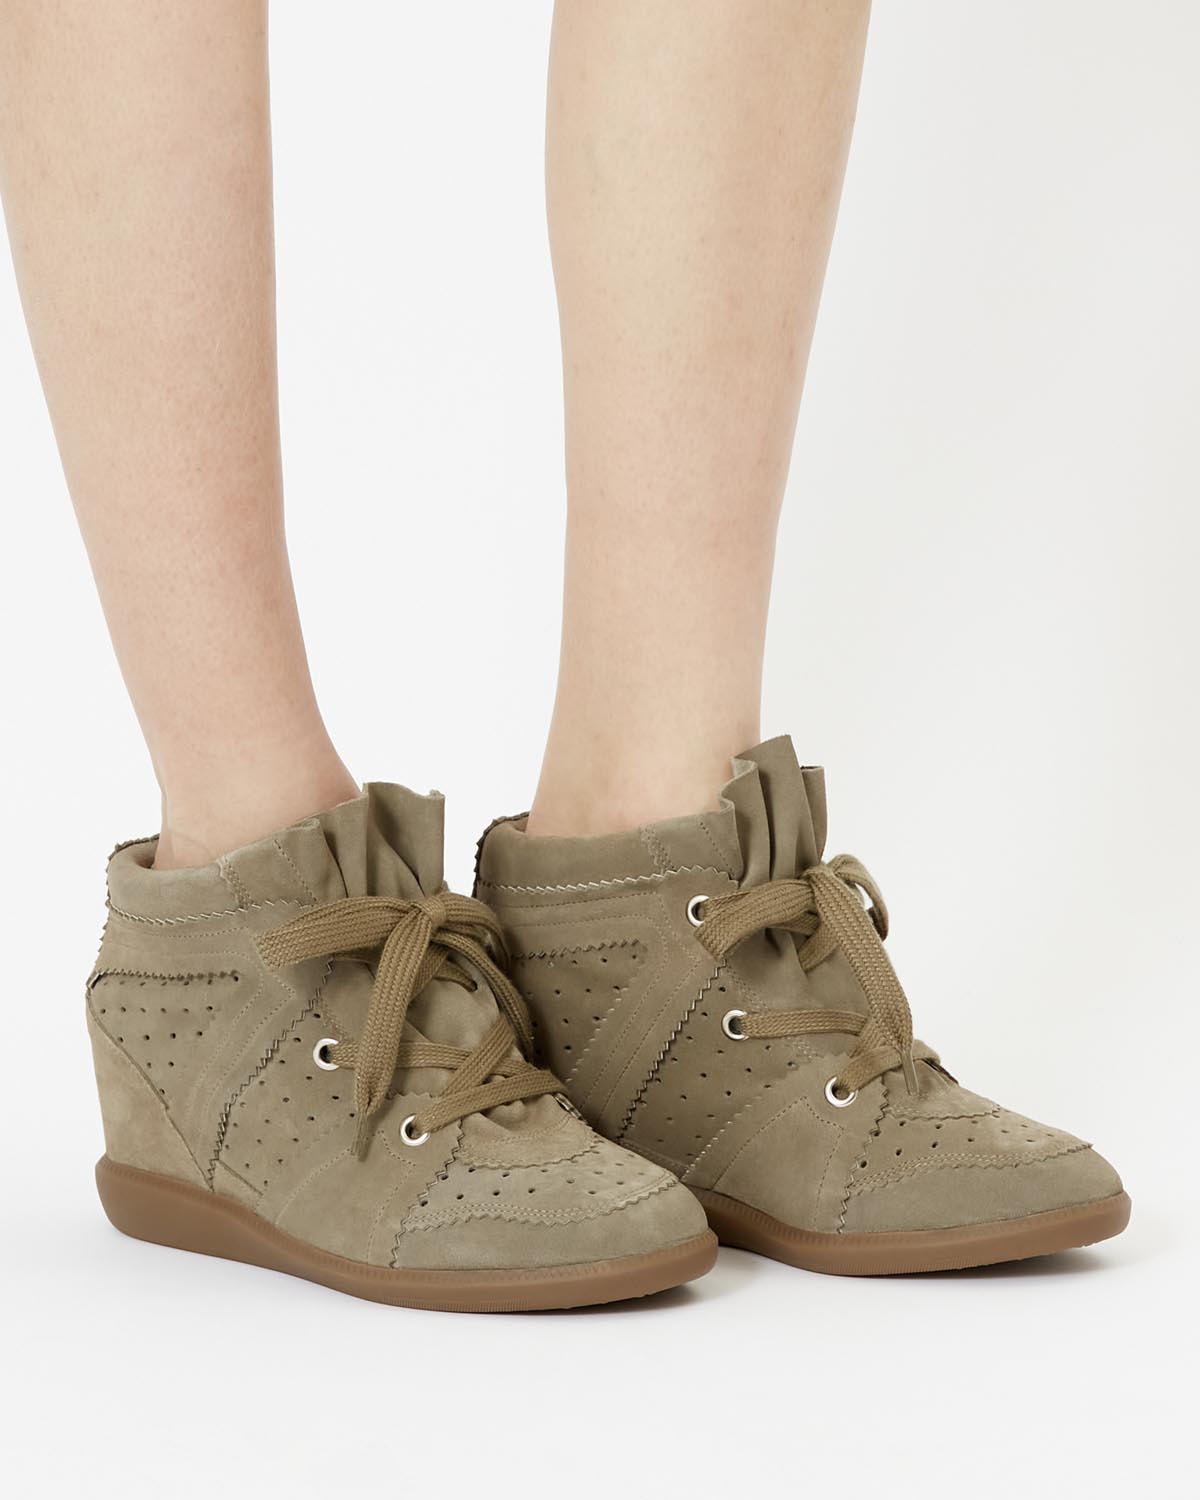 Bobby sneakers Woman Taupe 9